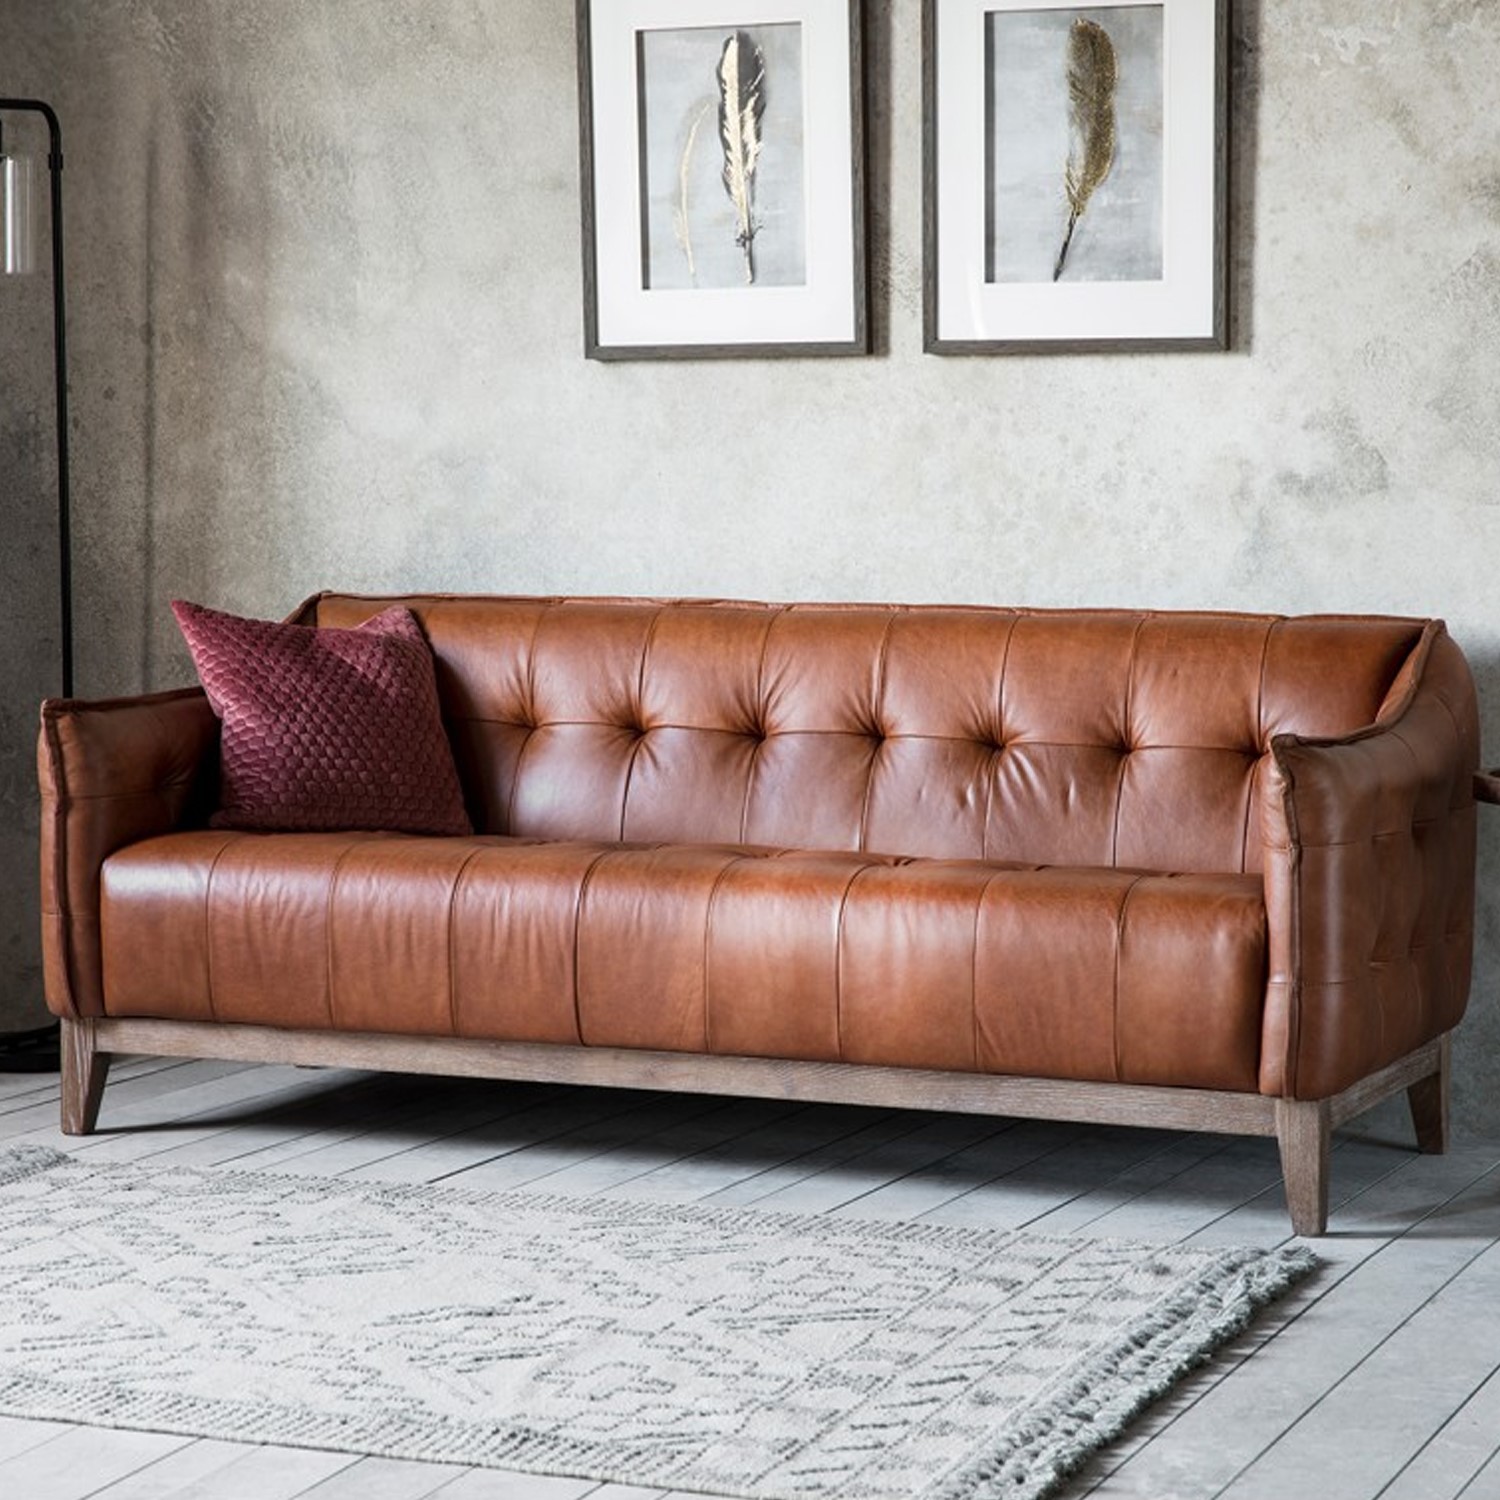 Gallery Ecclestone Brown 3 Seater, Tufted Brown Leather Sectional